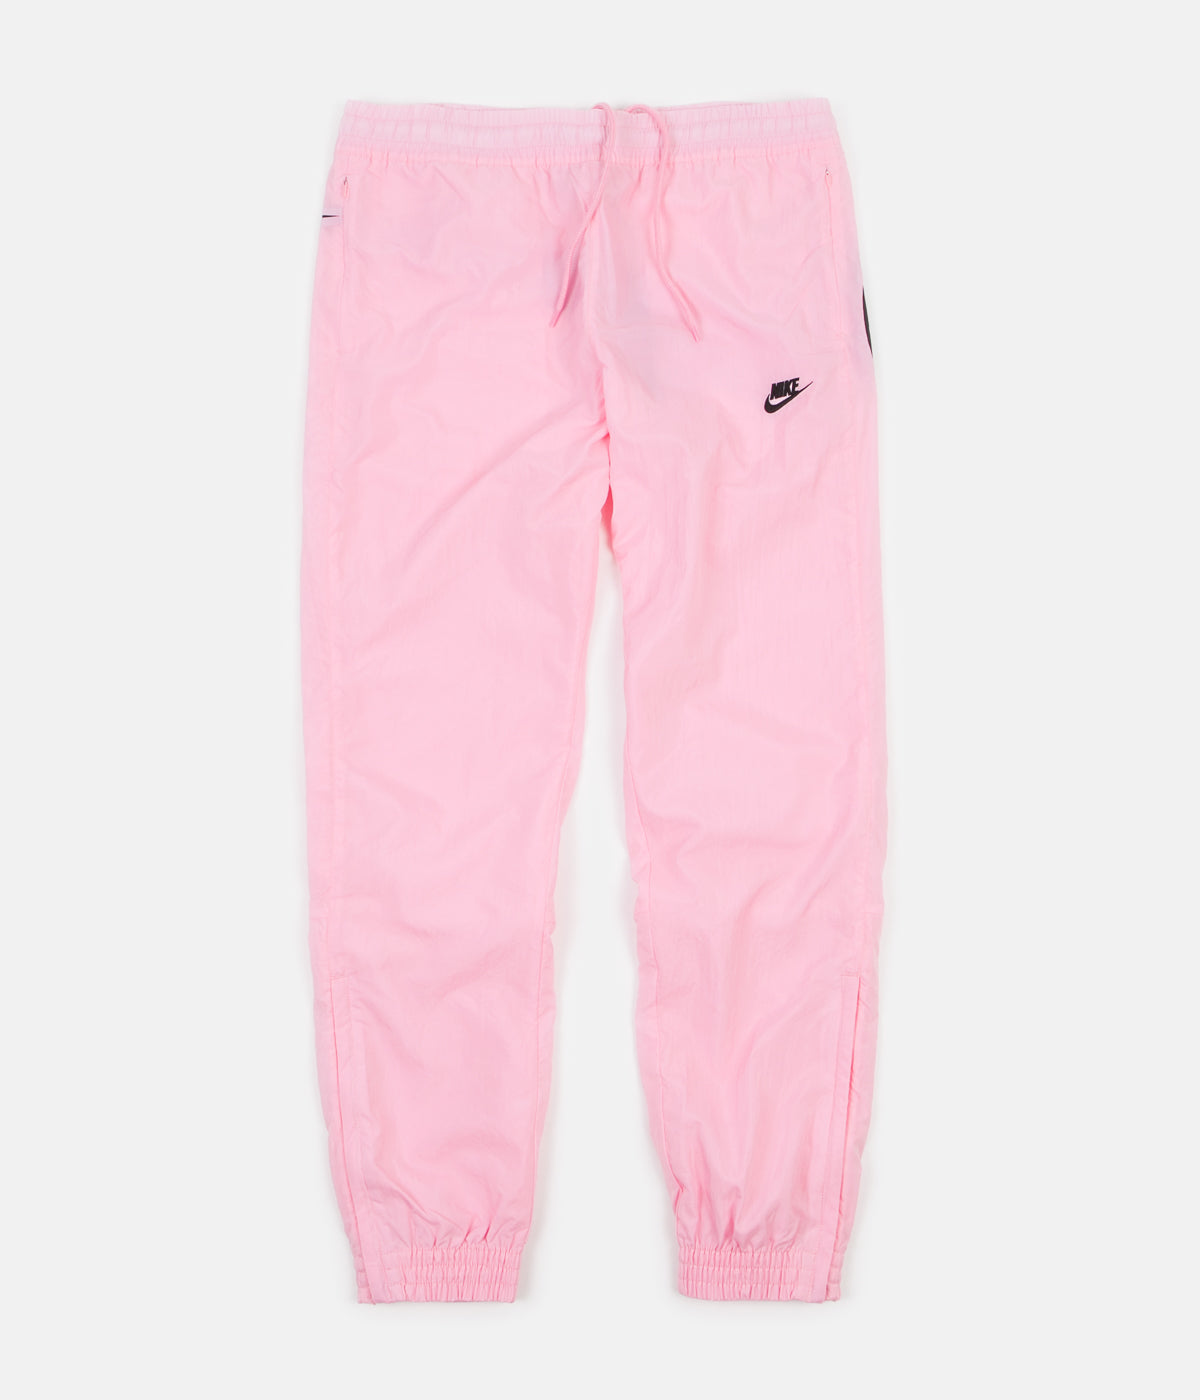 pink nike trousers 